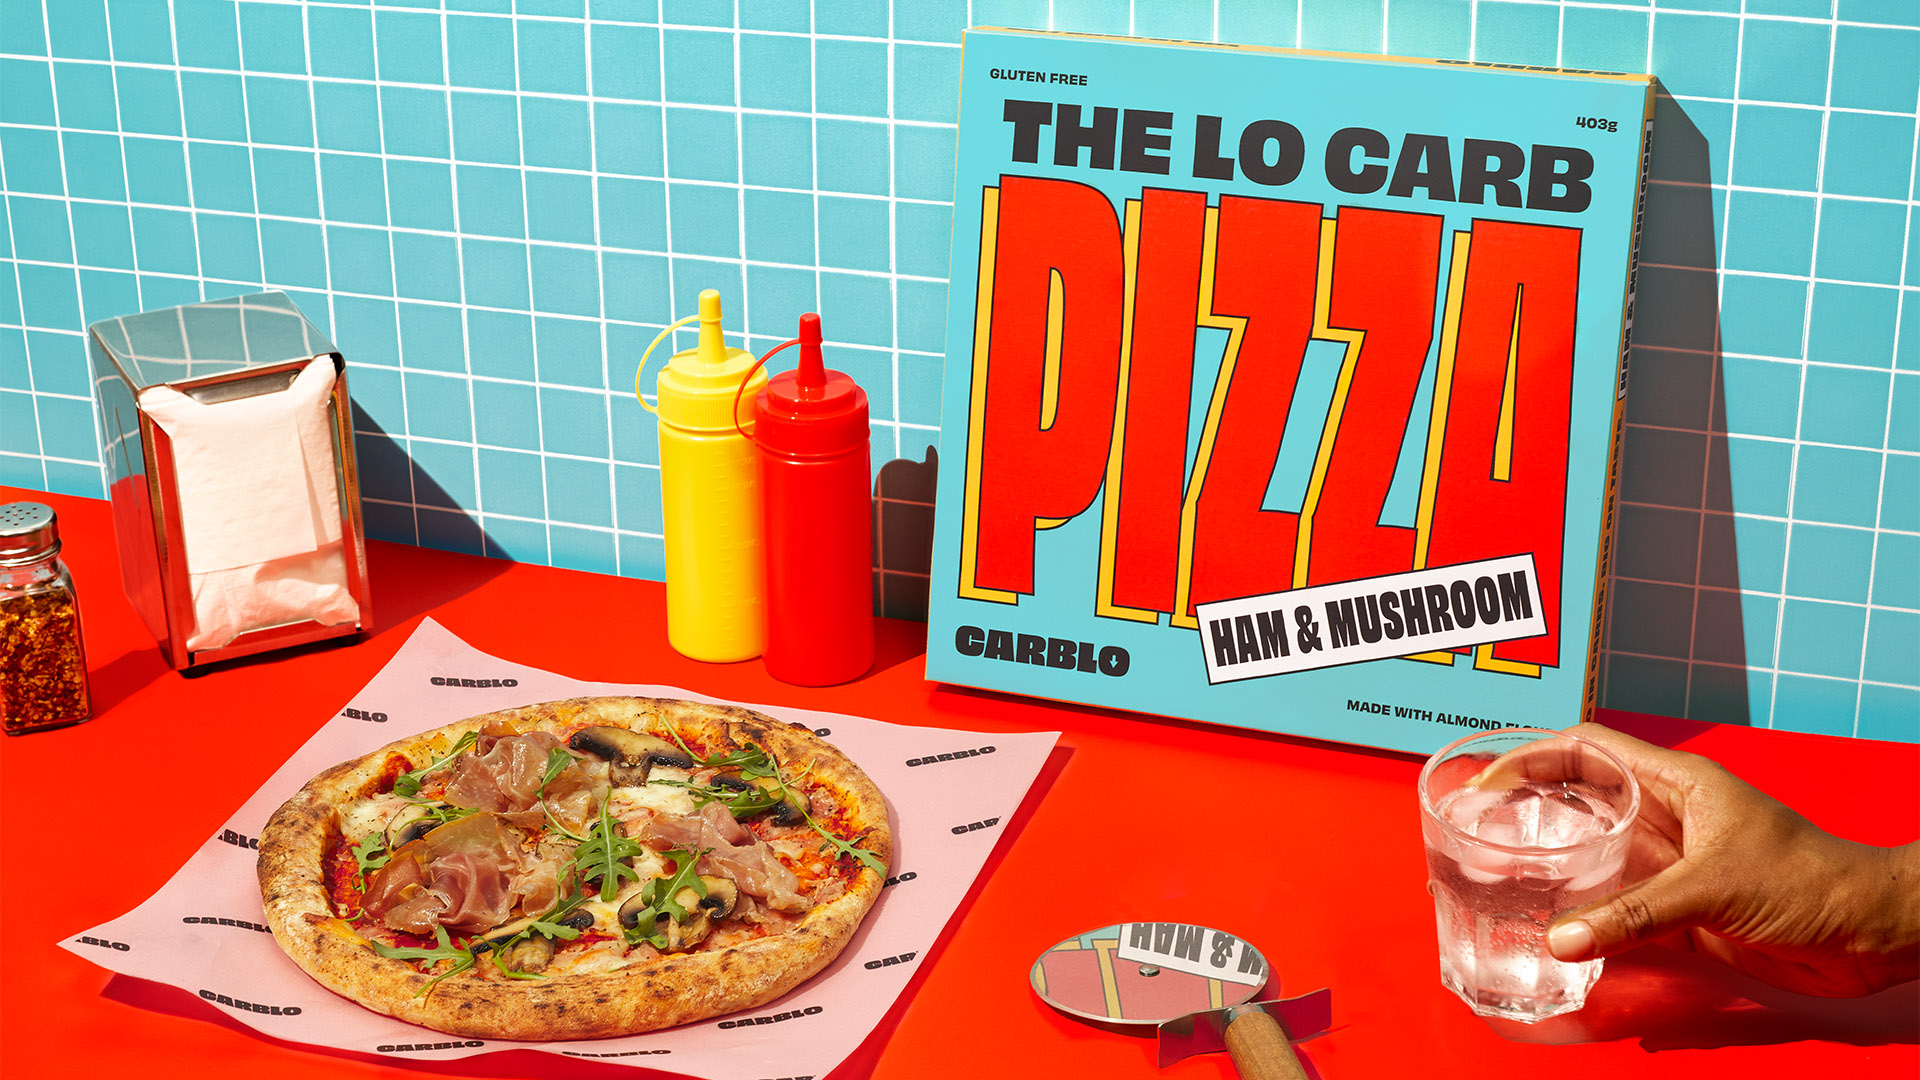 Carblo’s Colorful, High-Impact Look Adds Irresistible ‘90s Flavor to Low-Carb Pizza